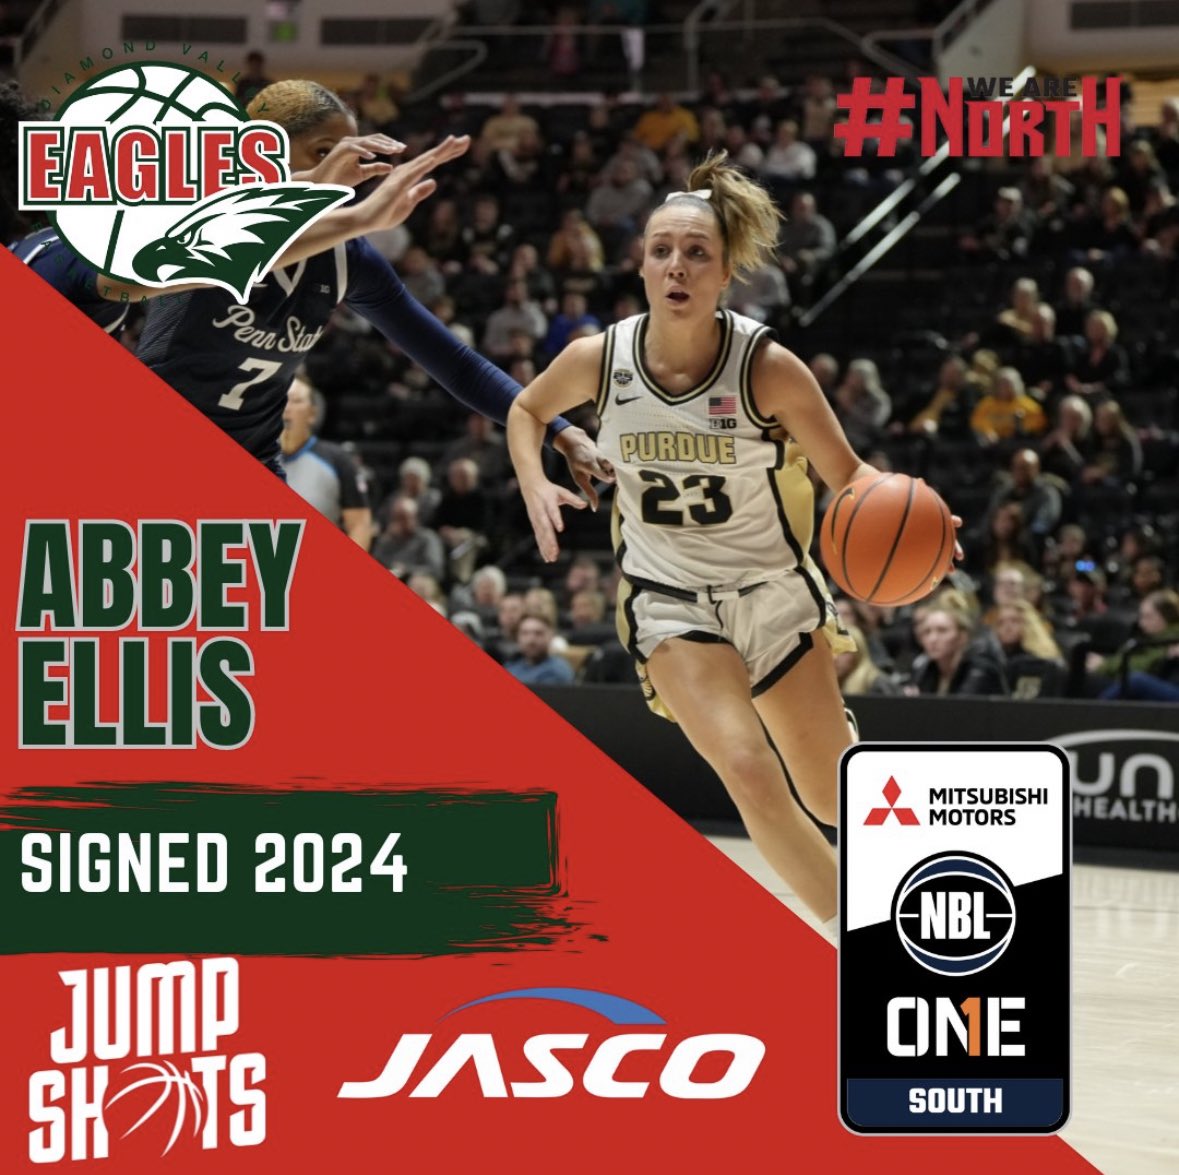 Former #Purdue guard Abbey Ellis has signed a deal with the Diamond Valley Eagles of the NBL1, the team announced. Ellis is headed back to Australia to begin her pro career.